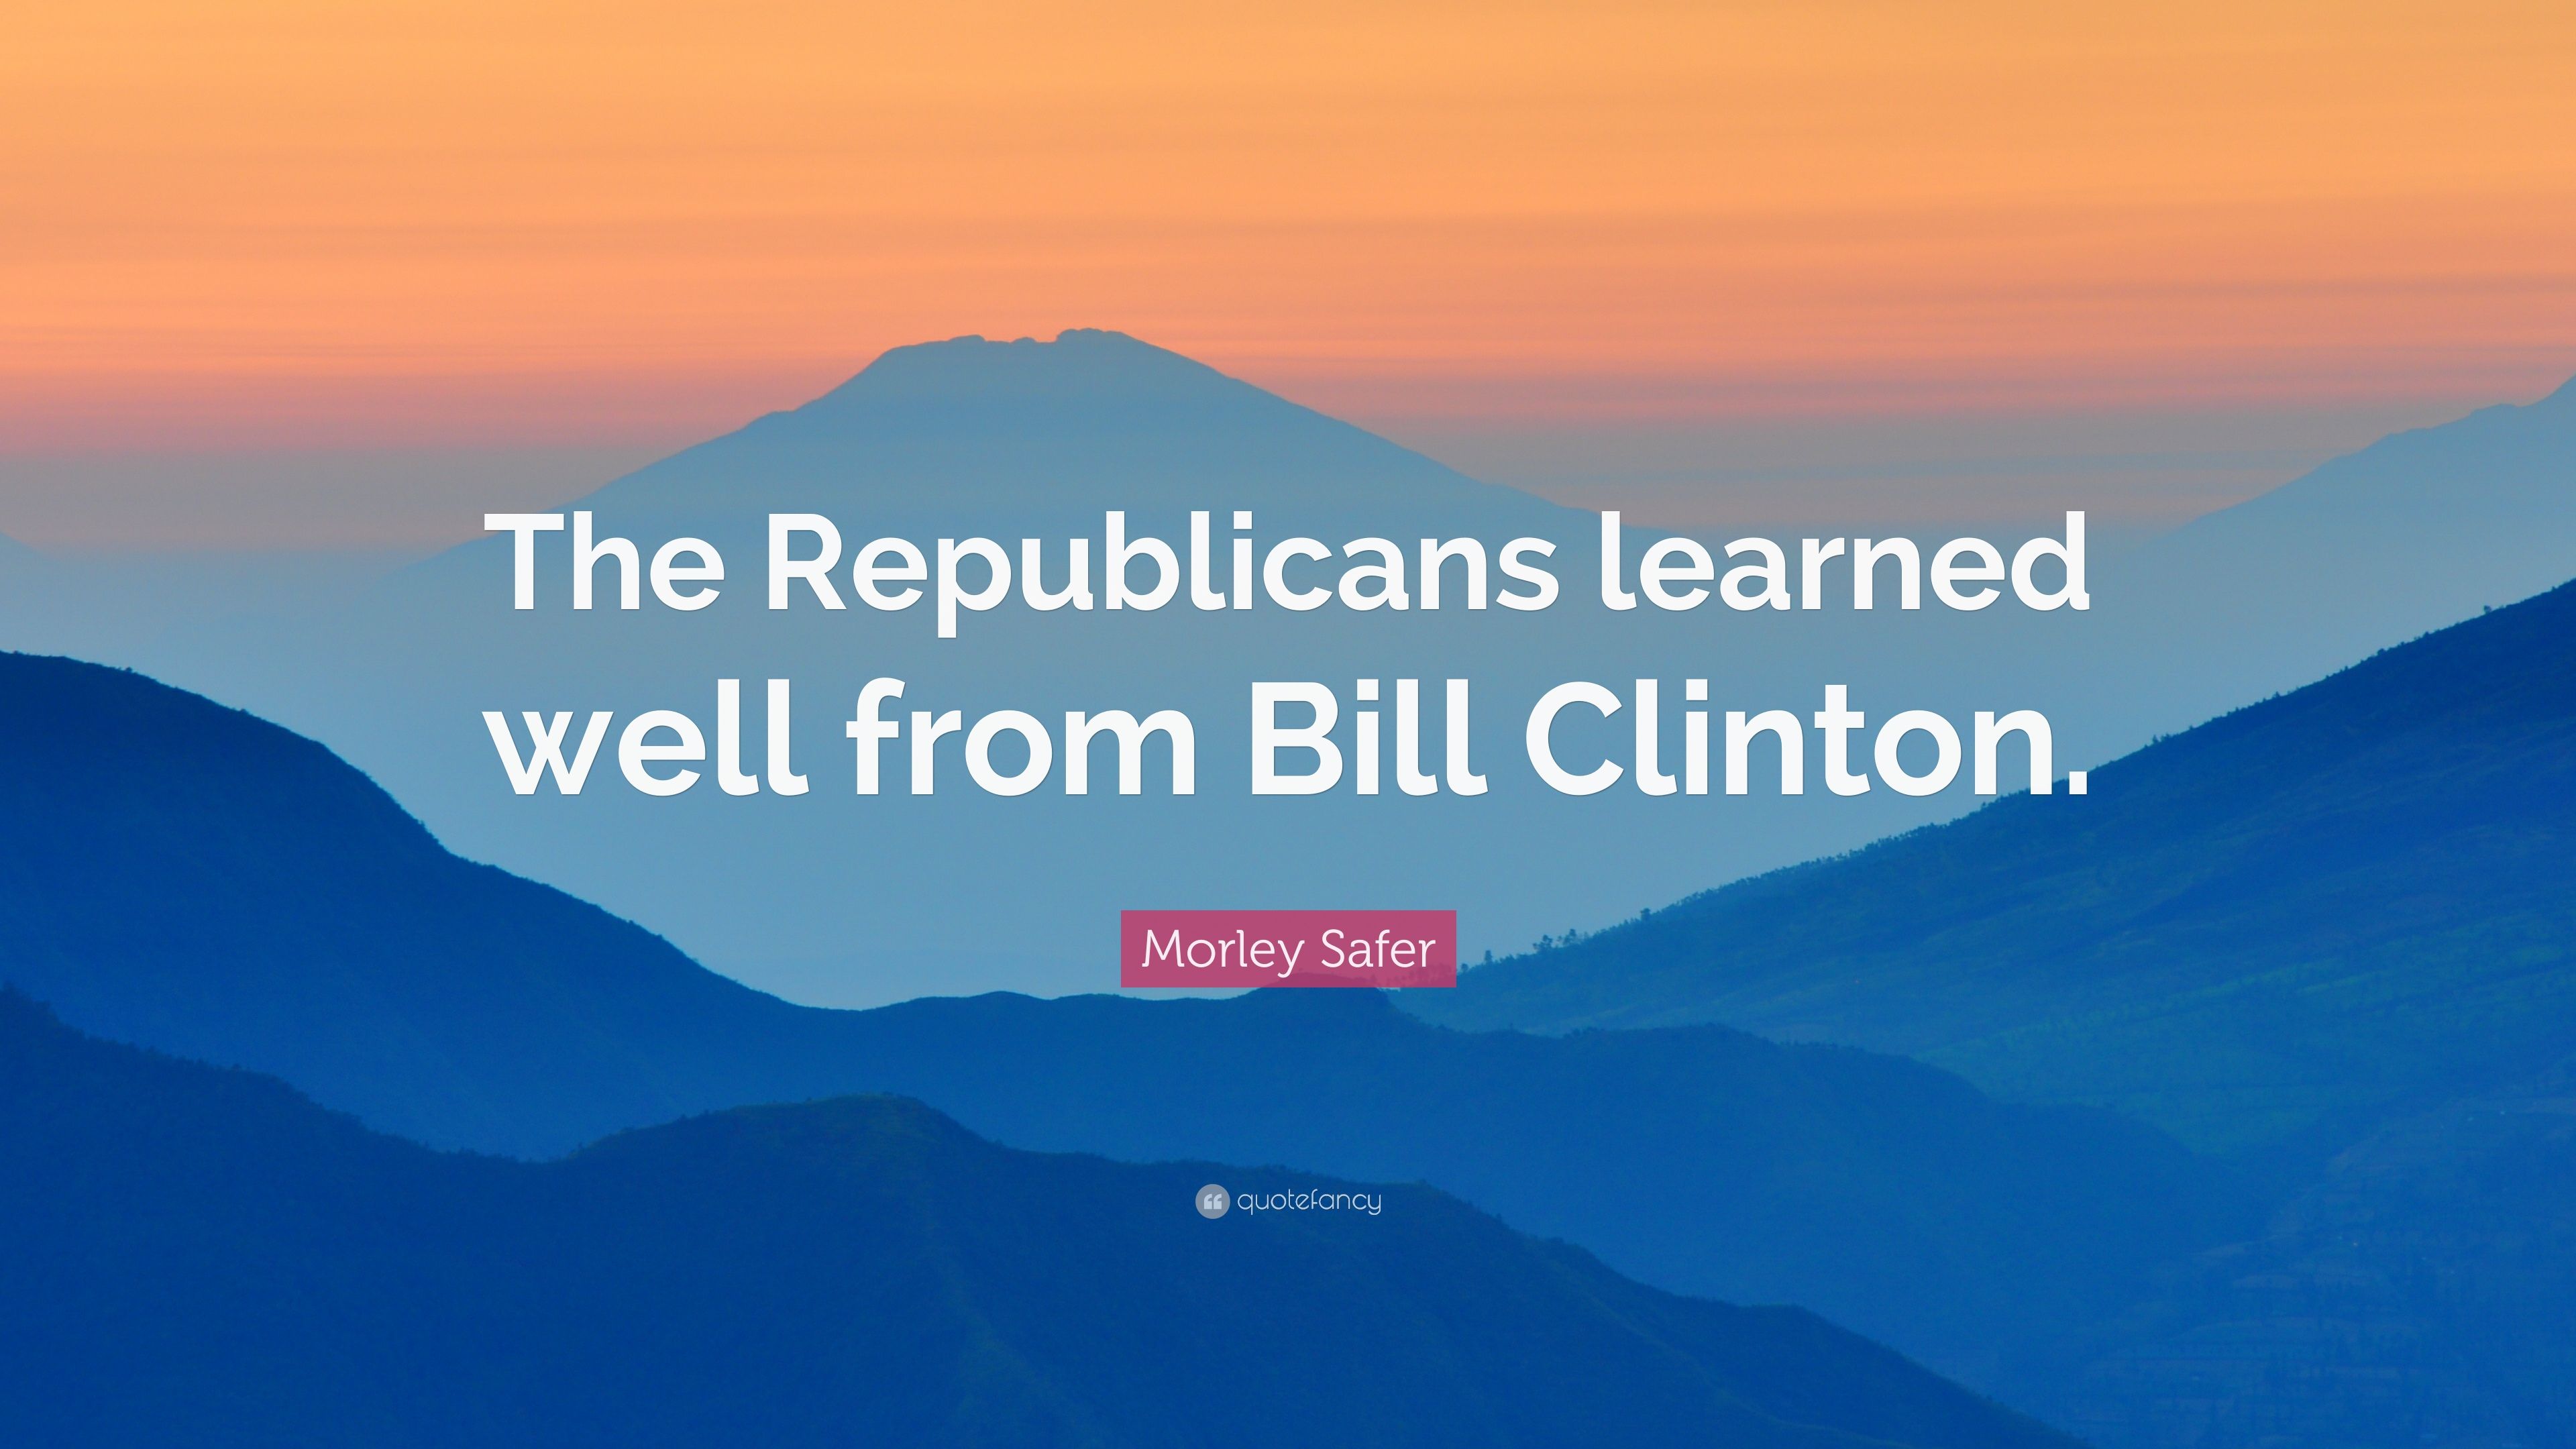 Morley Safer Quote: “The Republicans learned well from Bill